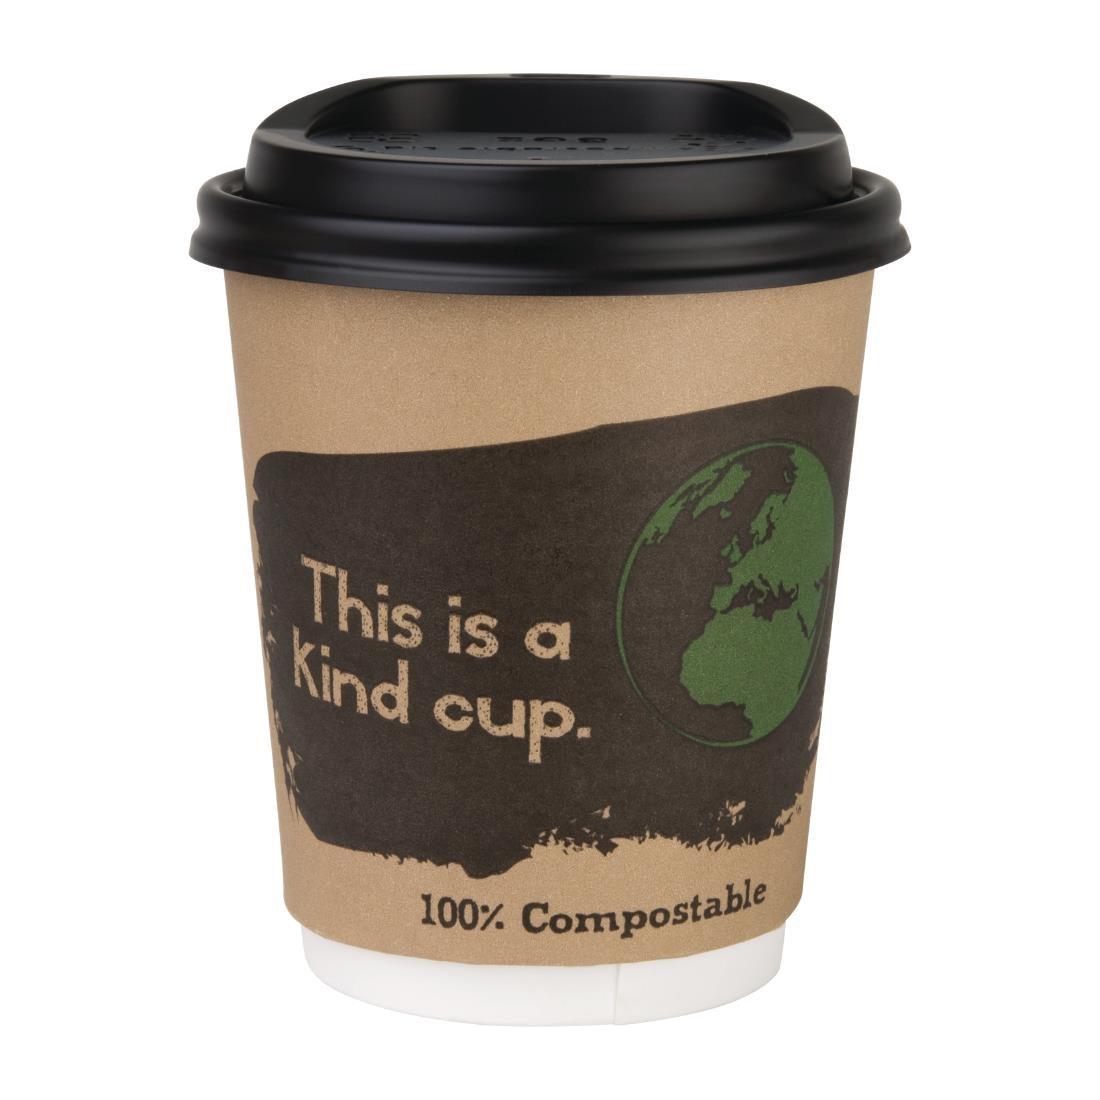 Fiesta DY985 Fiesta Compostable Hot Cup Double Wall 'Kind' 8oz (Box 500) - HospoStore